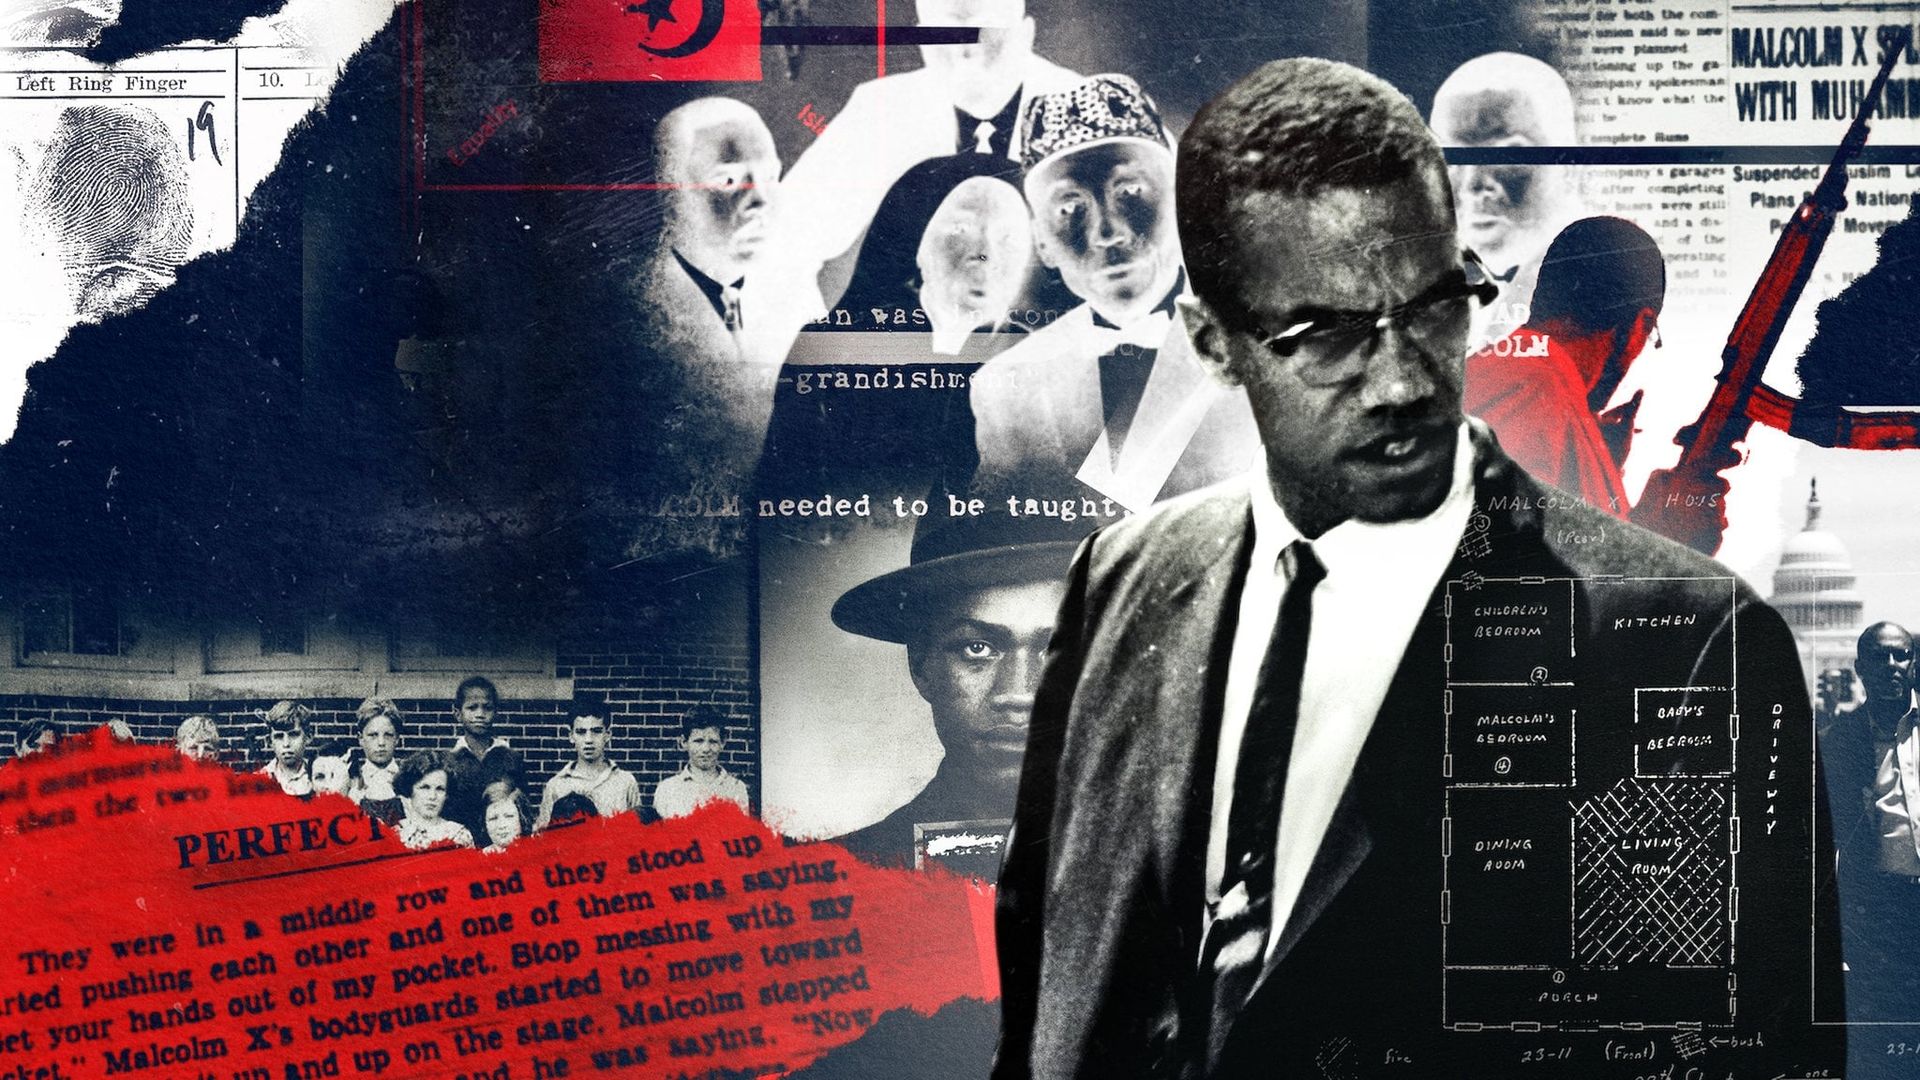 Who Killed Malcolm X? background